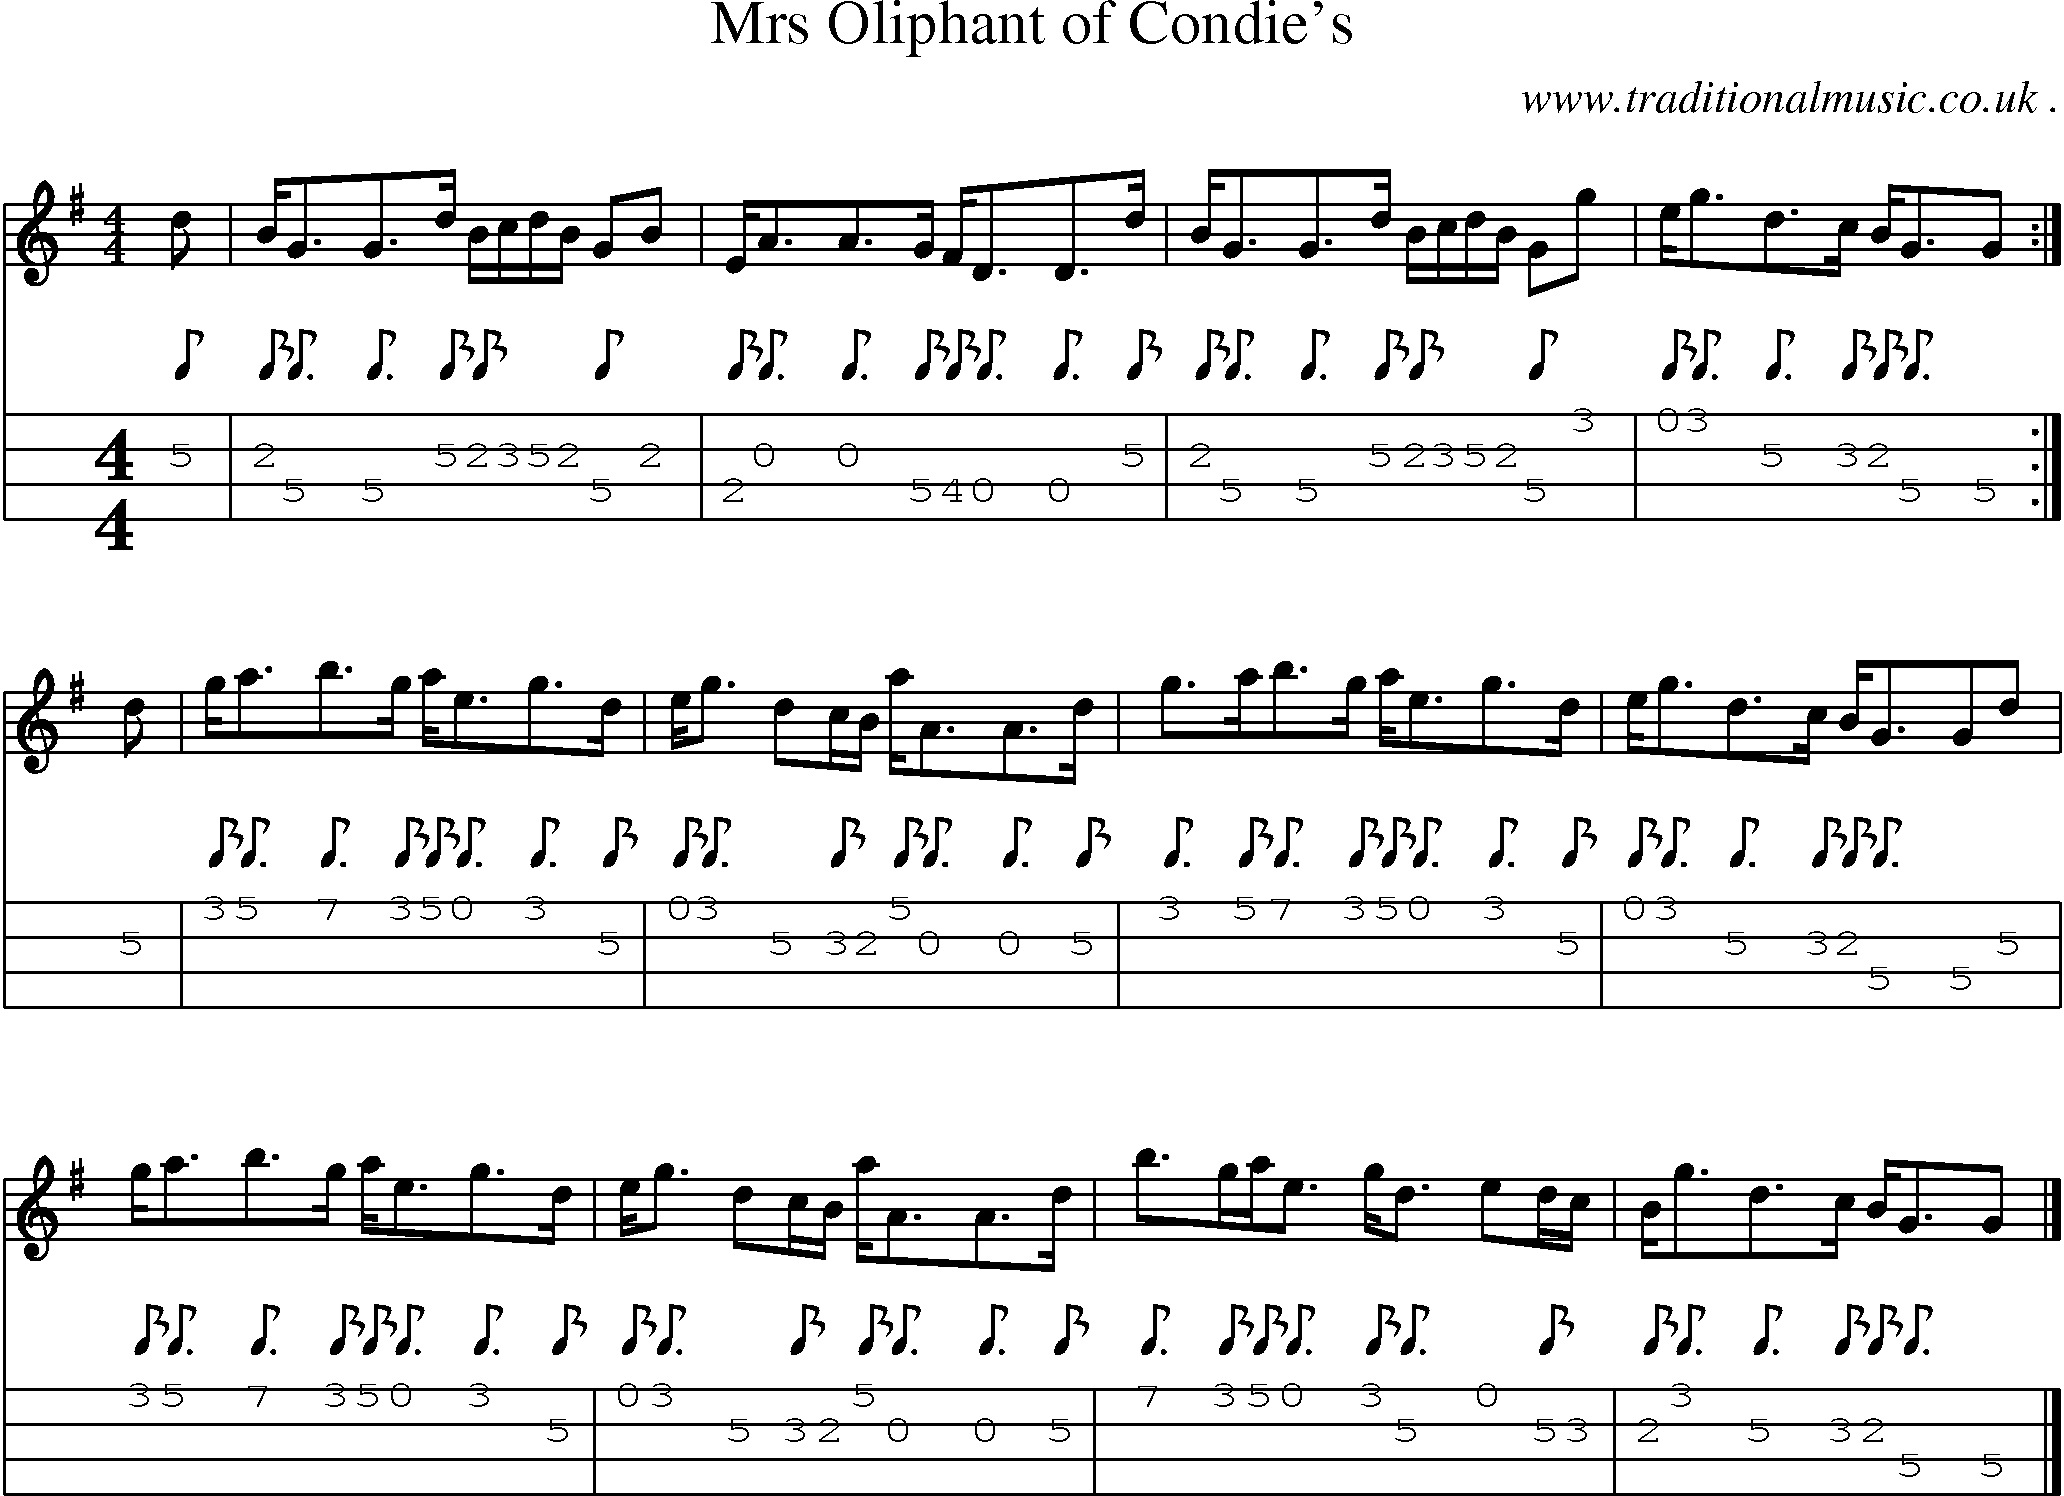 Sheet-music  score, Chords and Mandolin Tabs for Mrs Oliphant Of Condies